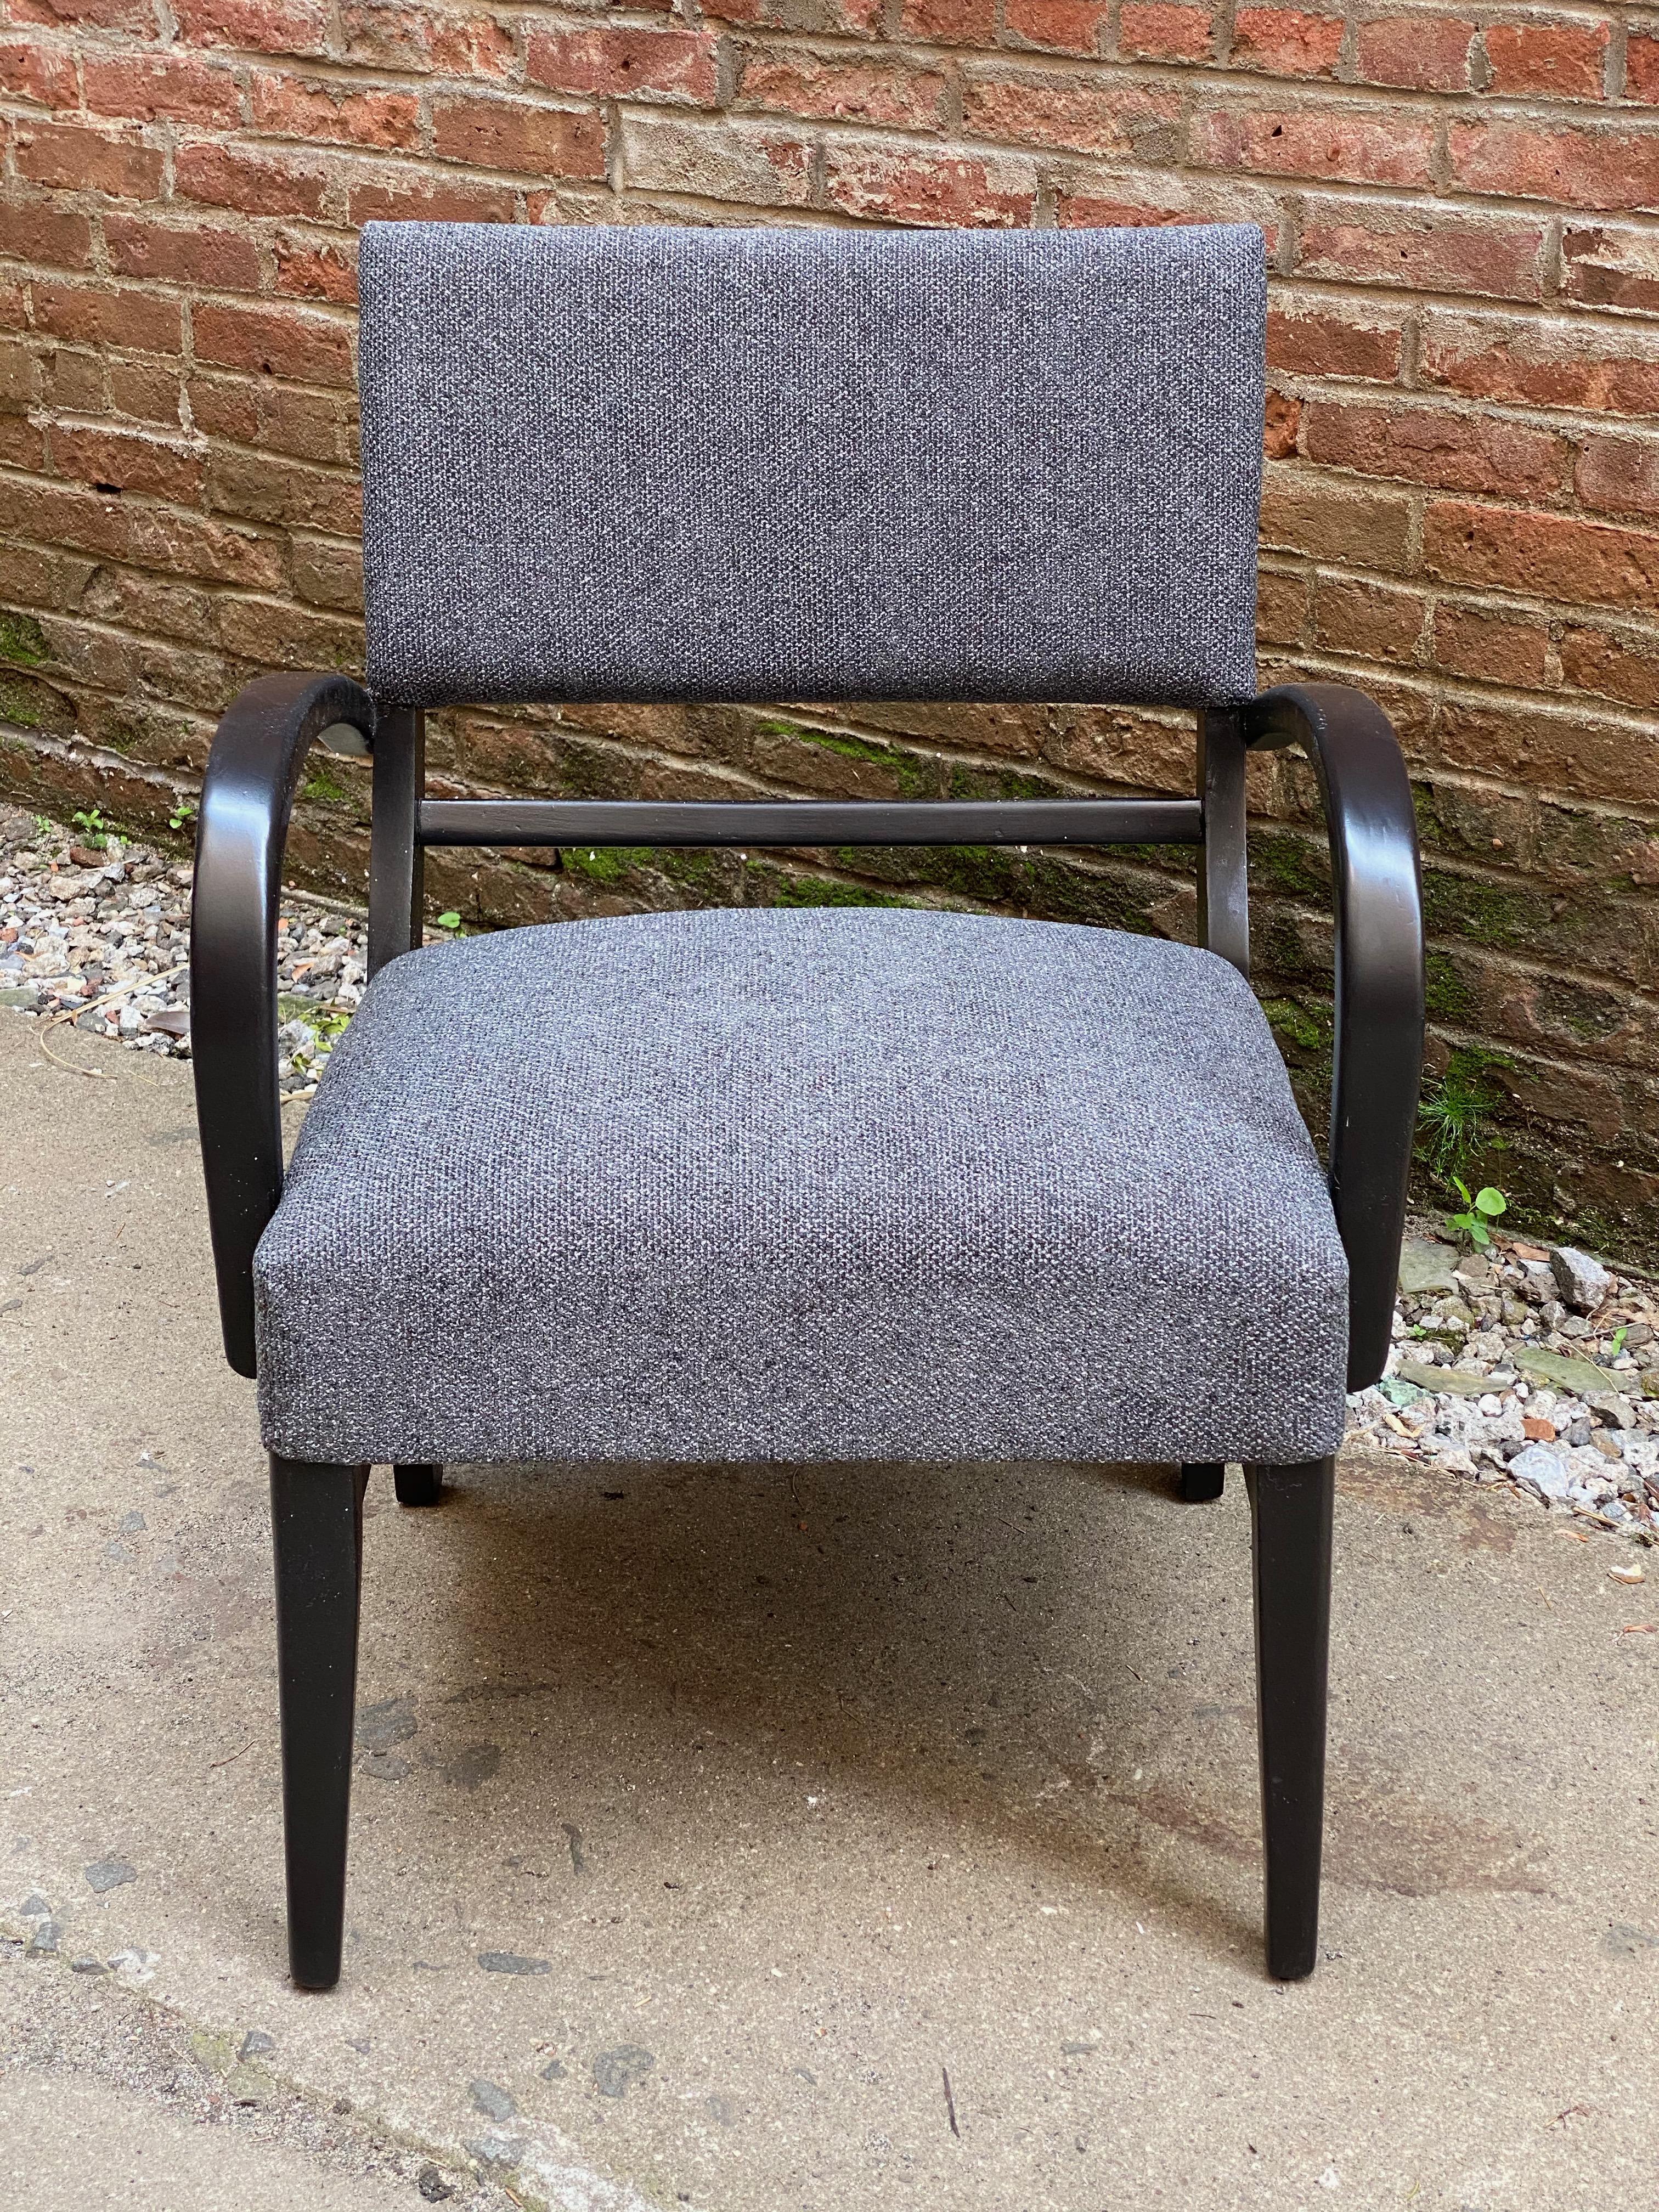 Late 1940s bow arm lounge chair. Reupholstered in a nicely textured gray fabric. Custom black painted wood frame. Great lines and profile. Stretcher base and tapered front legs. Structurally sound and sturdy.

Measures: Approximately 24